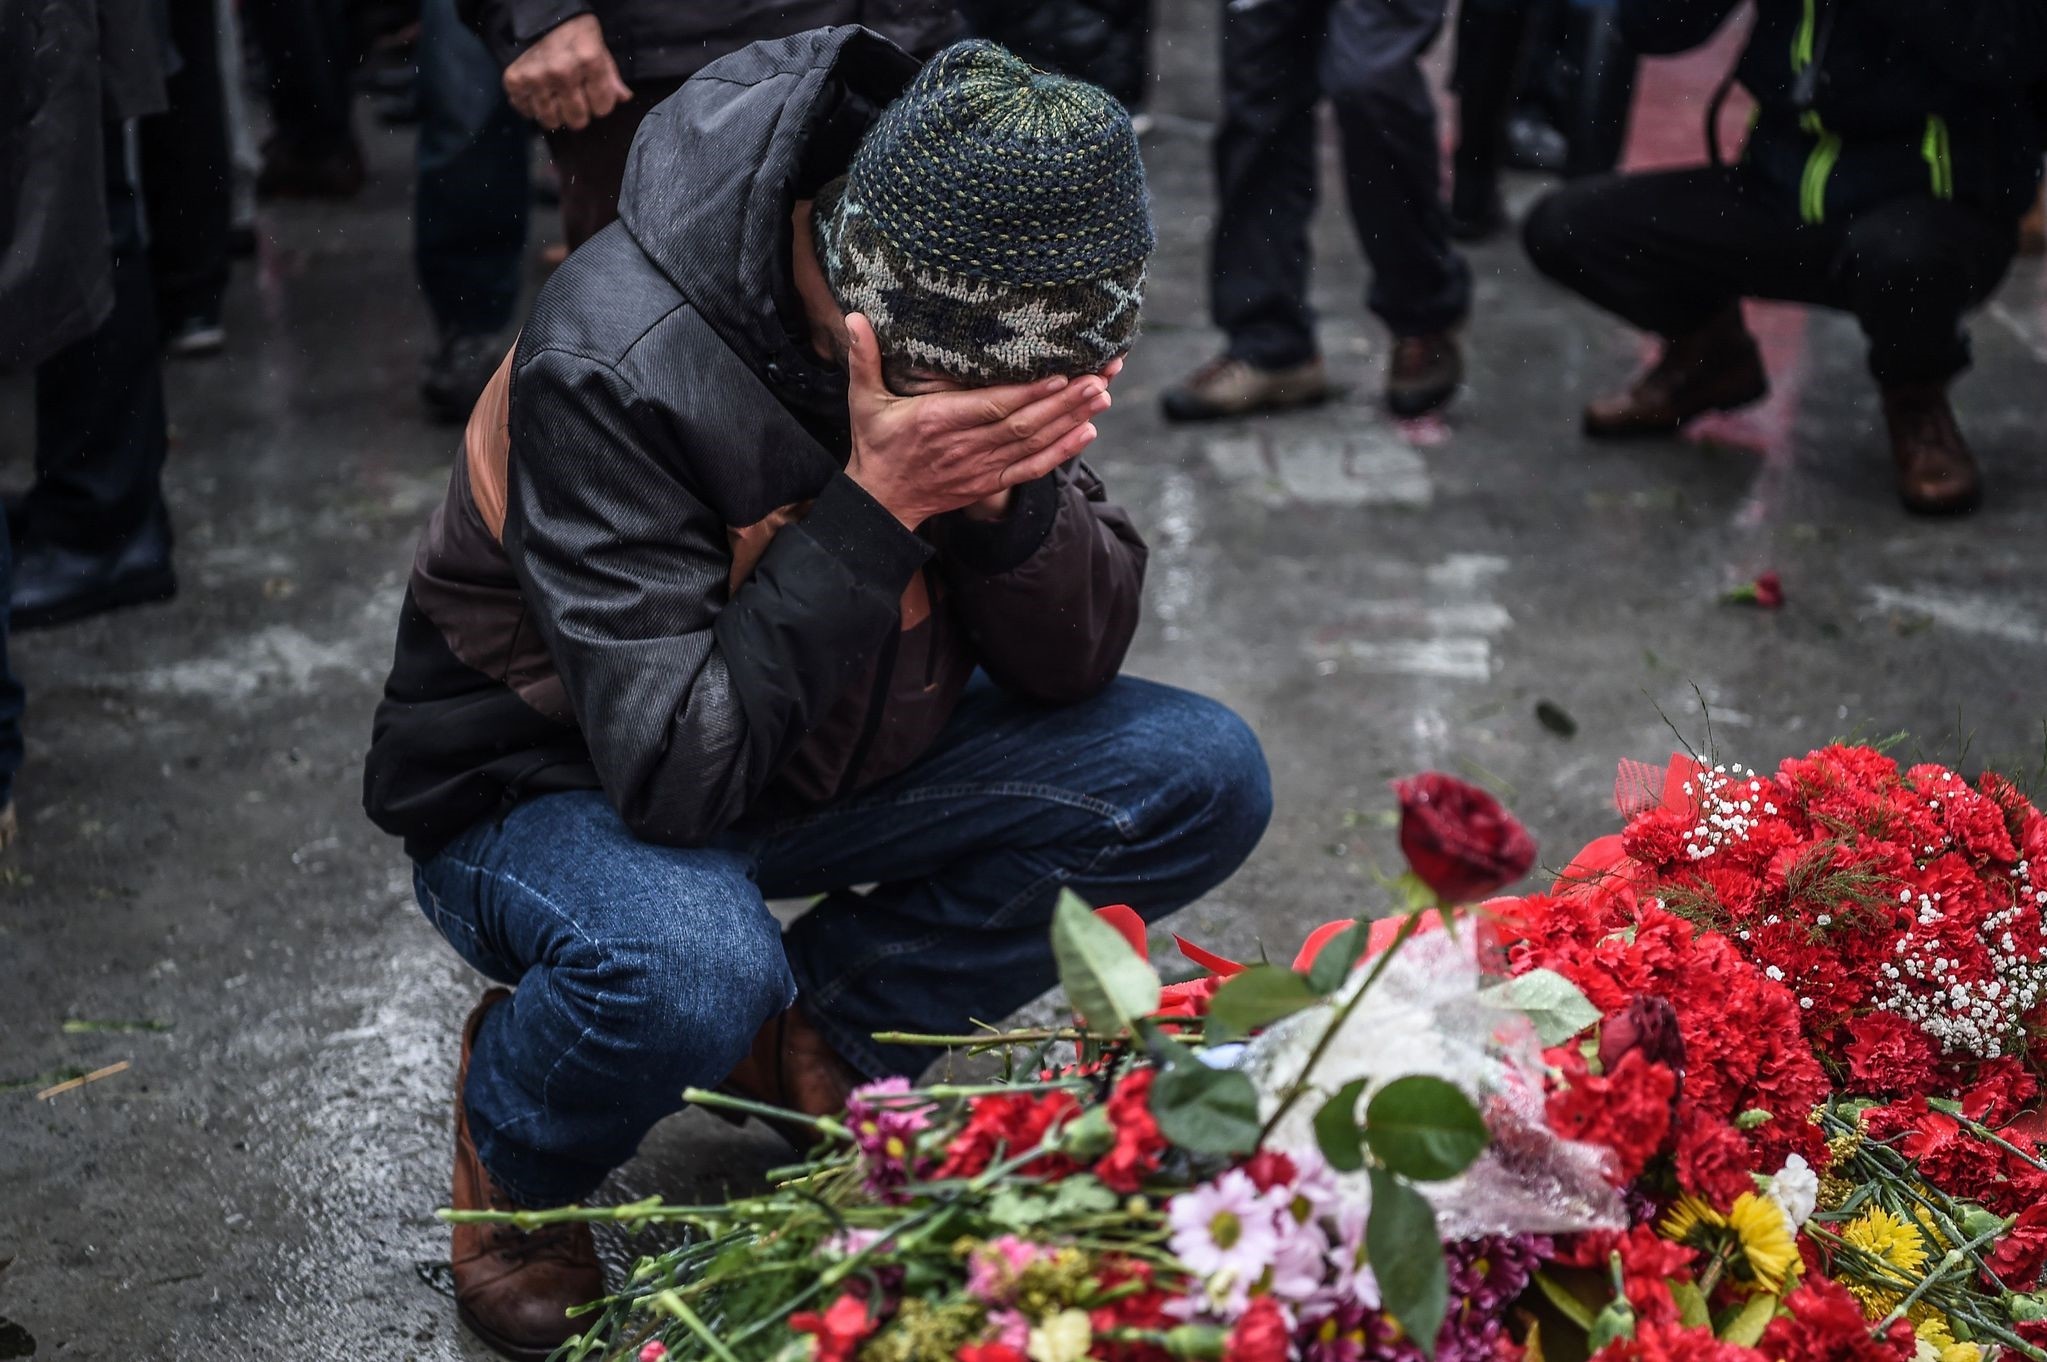 A grieving man reacts before the flowers laid for victims at the site of blasts.